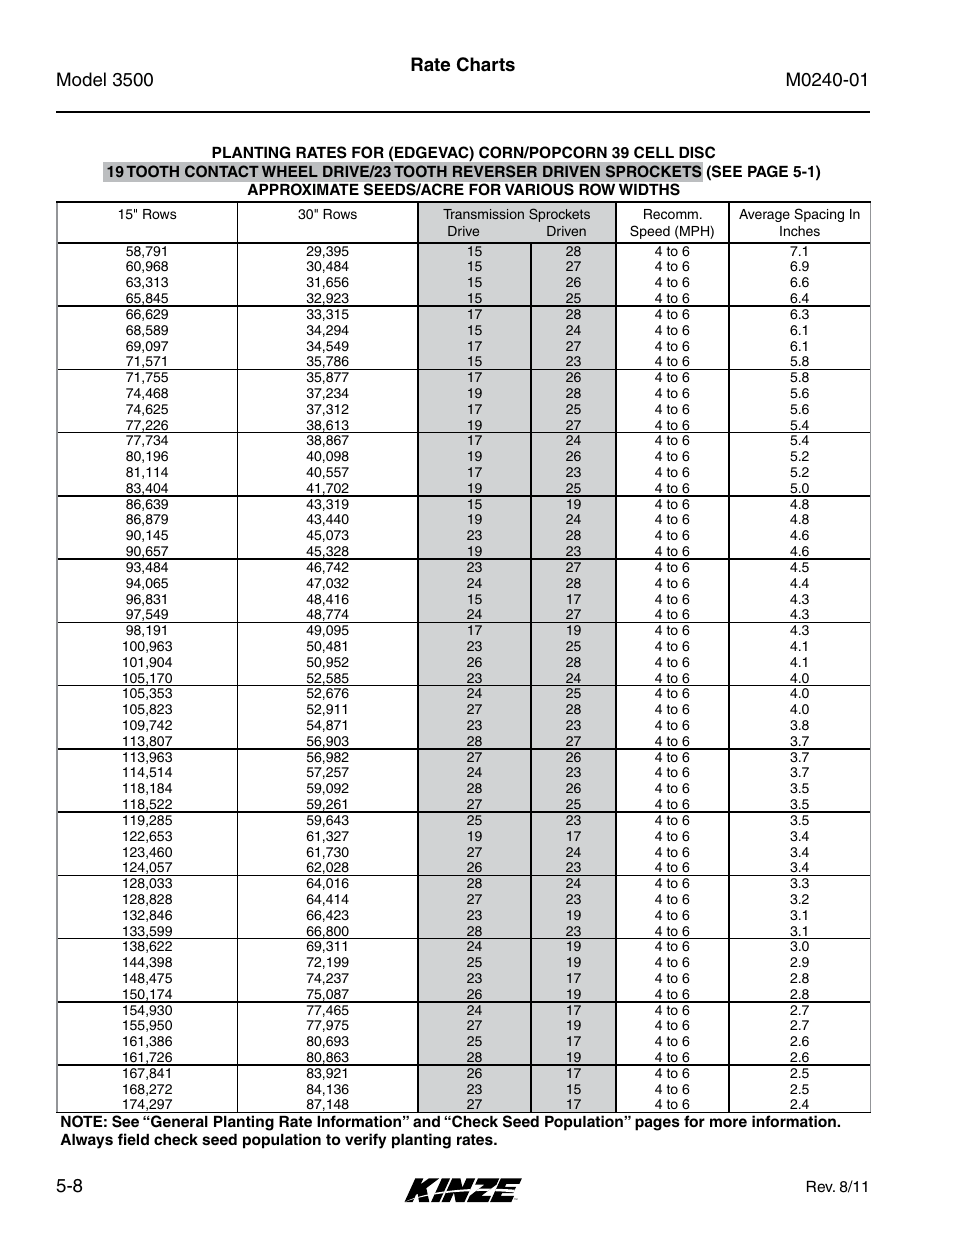 Rate charts | Kinze 3500 Lift and Rotate Planter Rev. 7/14 User Manual | Page 78 / 140